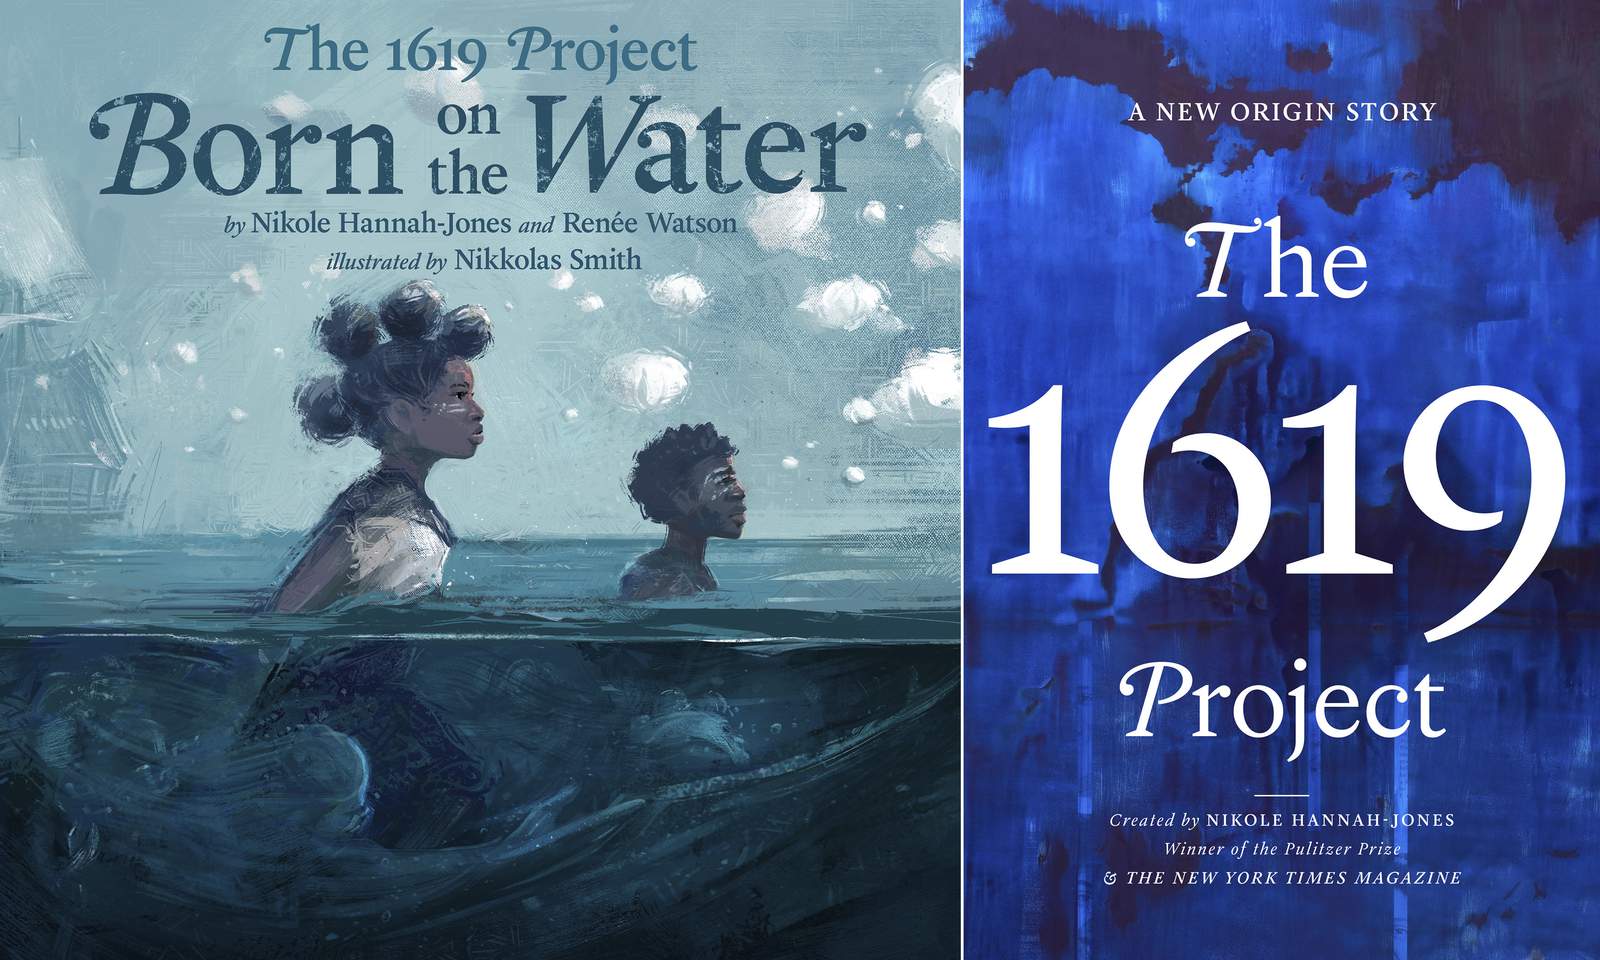 Two books based on '1619 Project' coming out in November